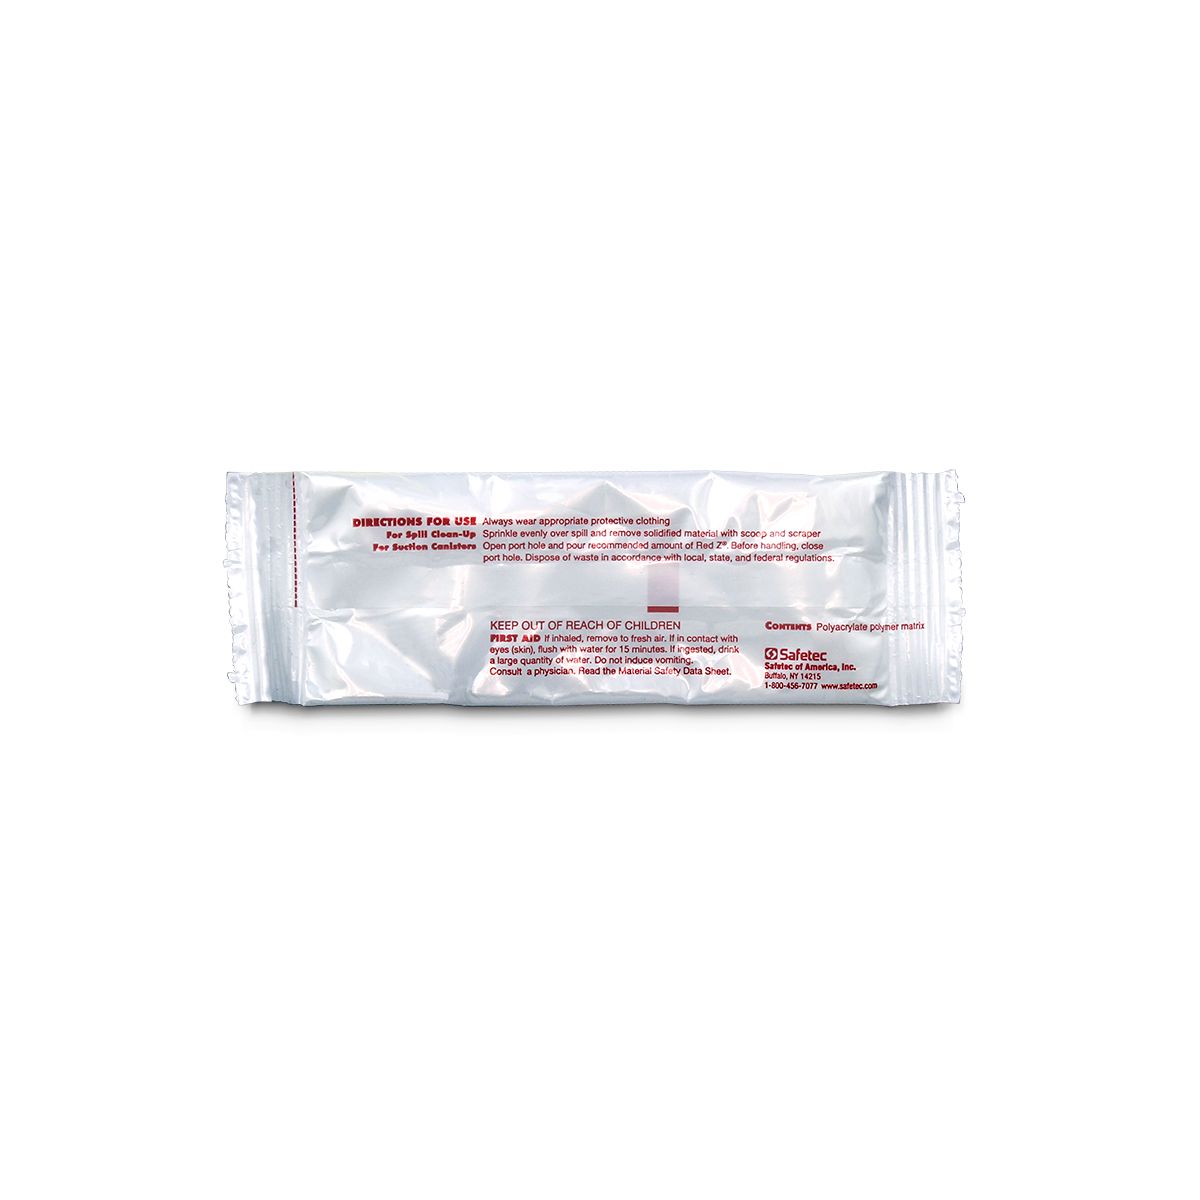 Red Z® Spill Control Solidifier Single Use Pouch - Inspection and Spill Control